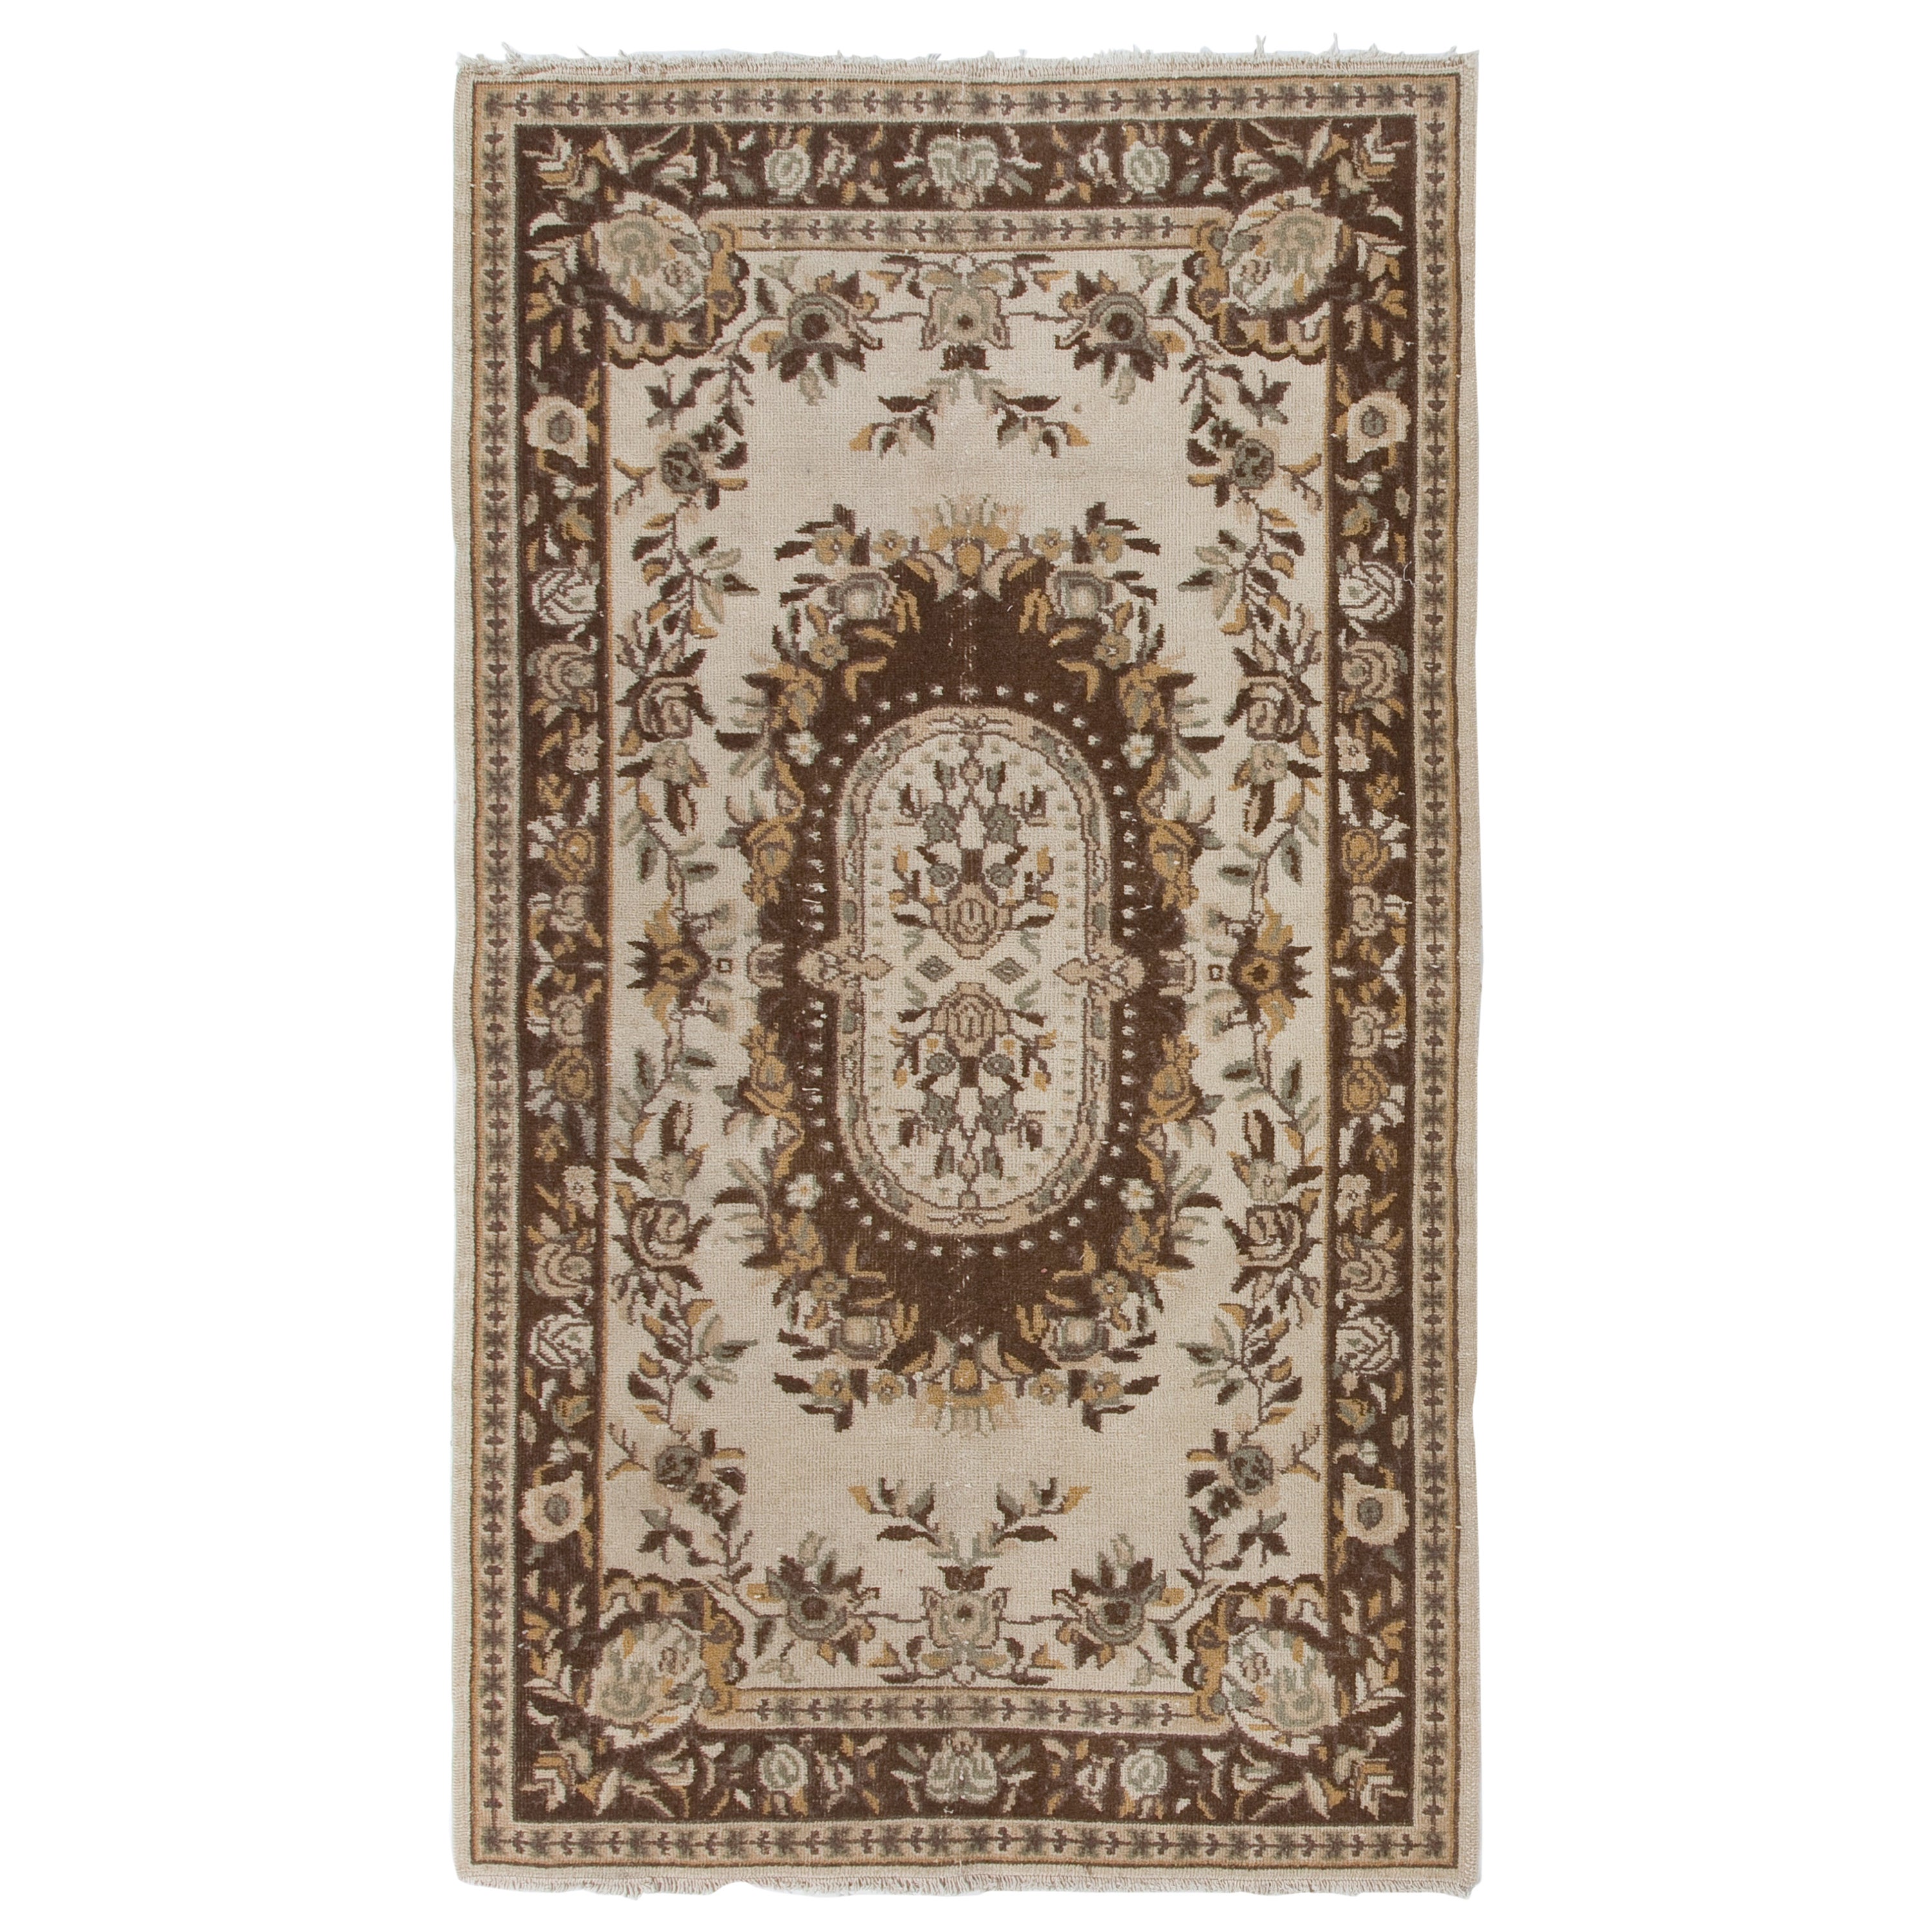 4x7 Ft Handmade Floral Design Anatolian Accent Rug in Beige, Brown & Rust Colors For Sale